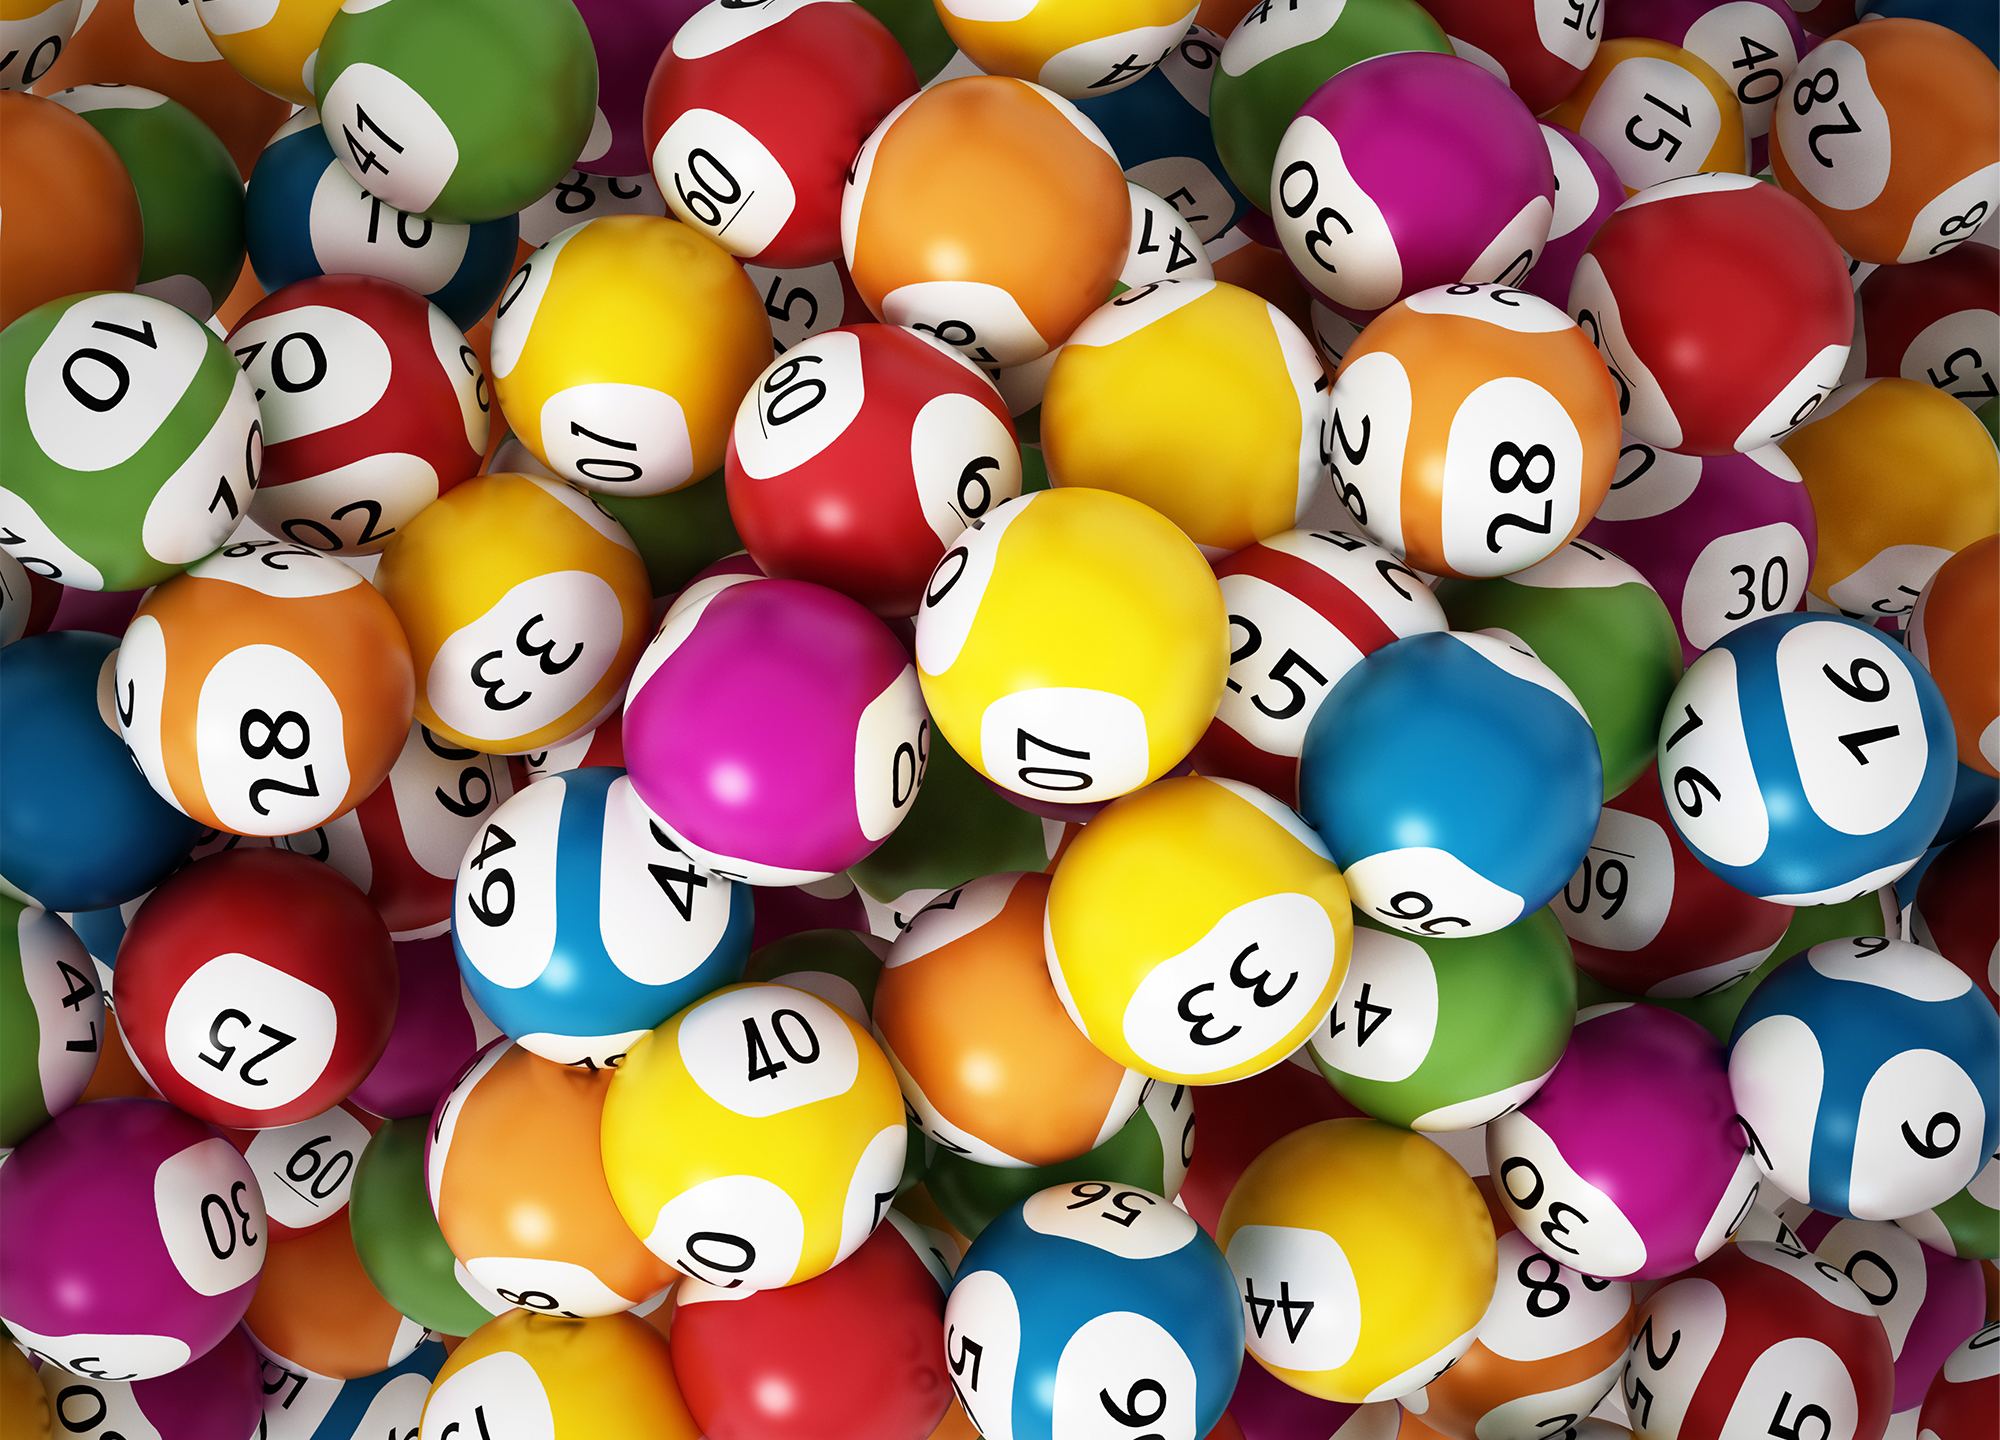 Lottery balls in lots of different bright colours with different numbers printed on them in black